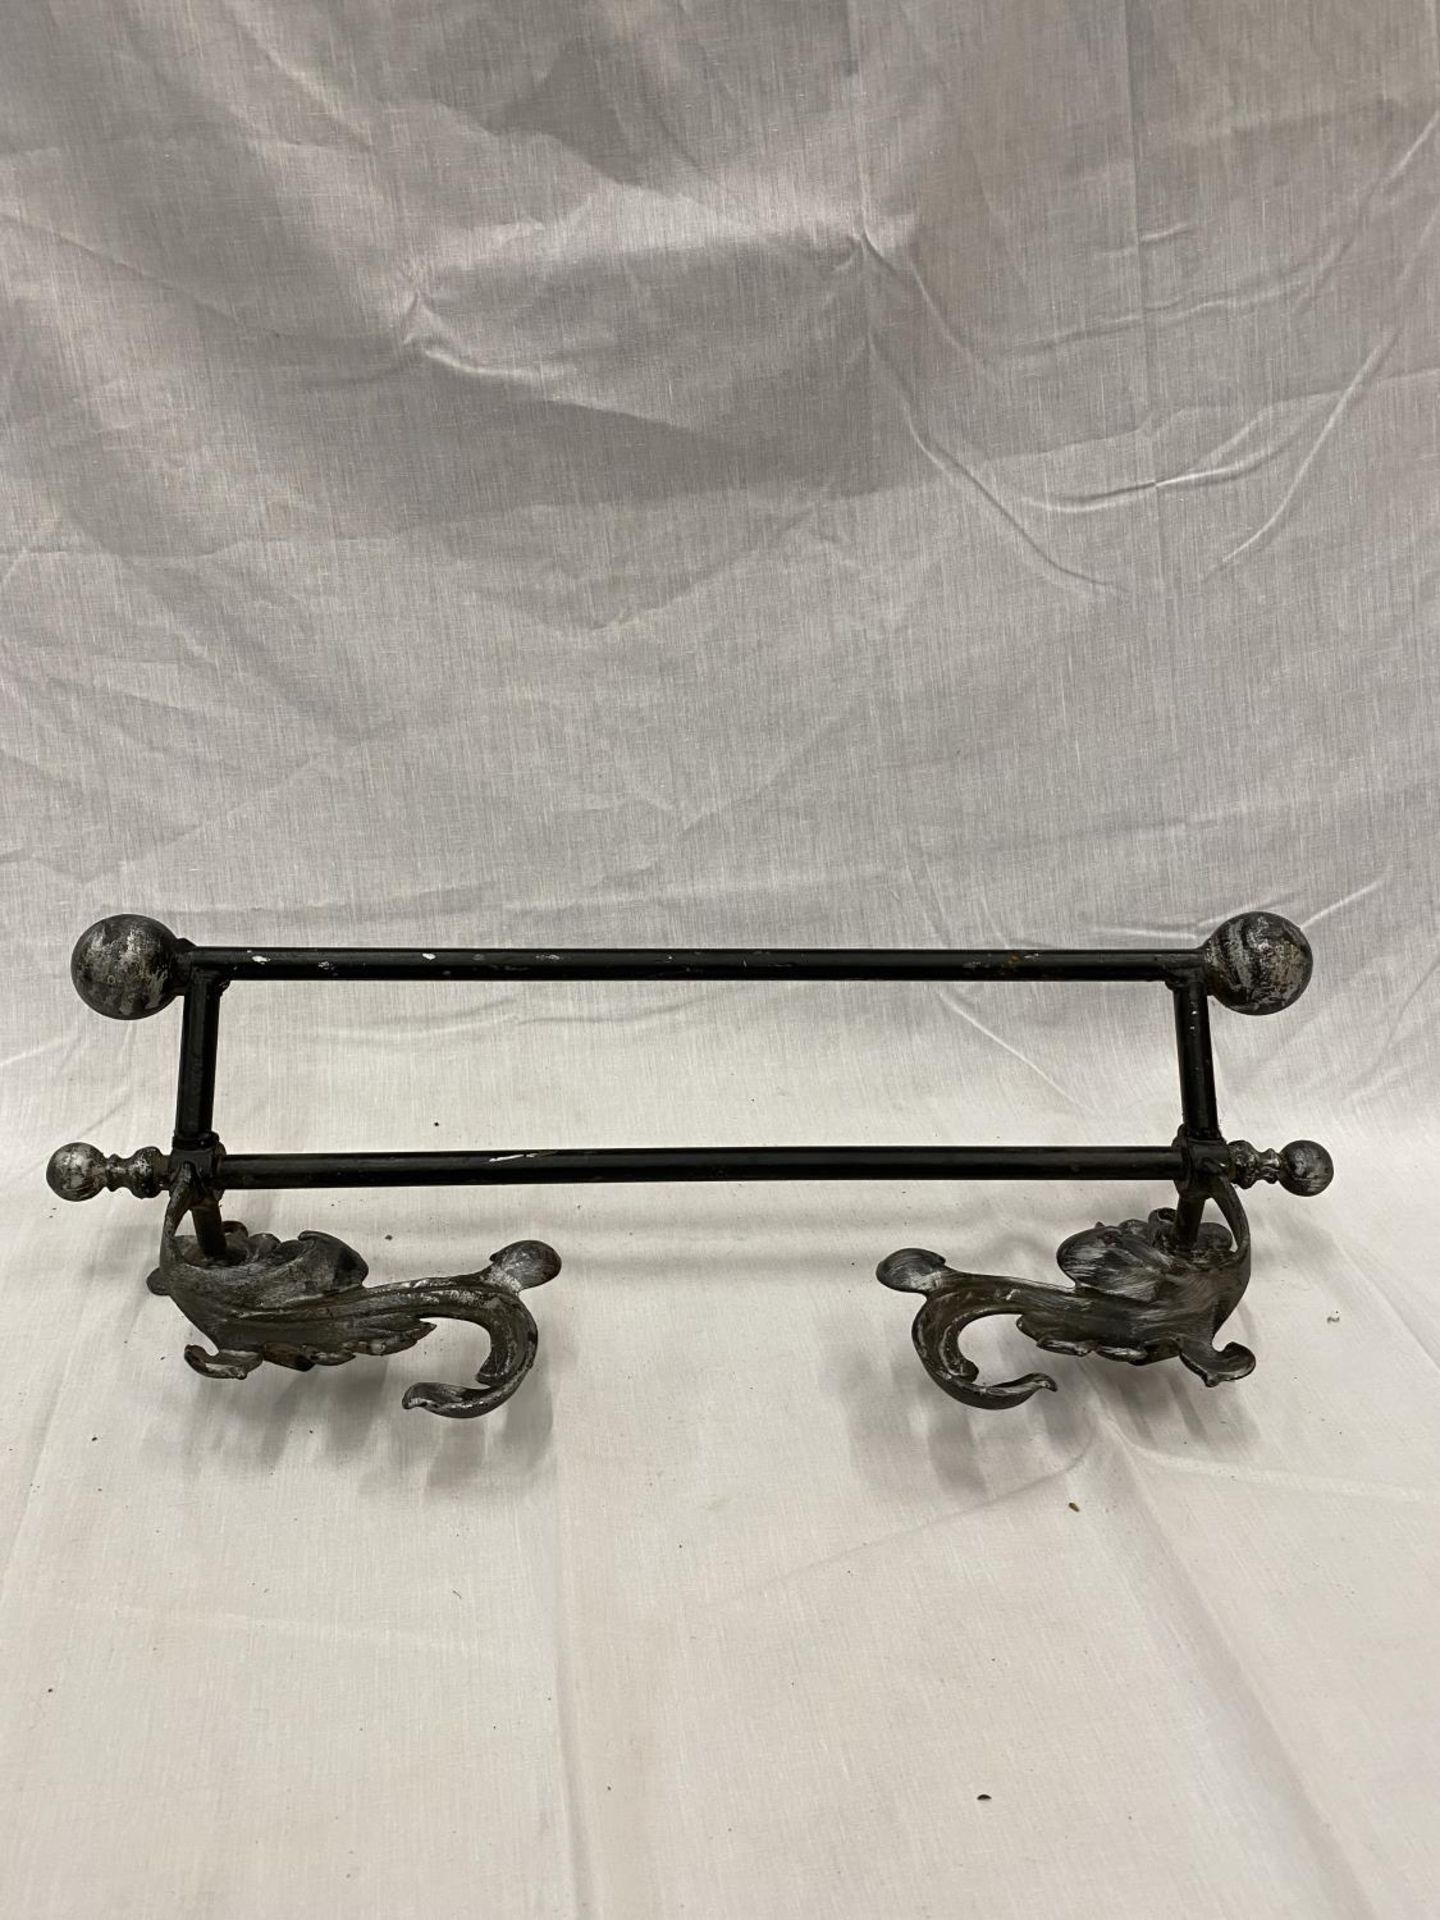 A DECORATIVE WROUGHT IRON WALL MOUNTED RACK/RAIL - Image 6 of 12